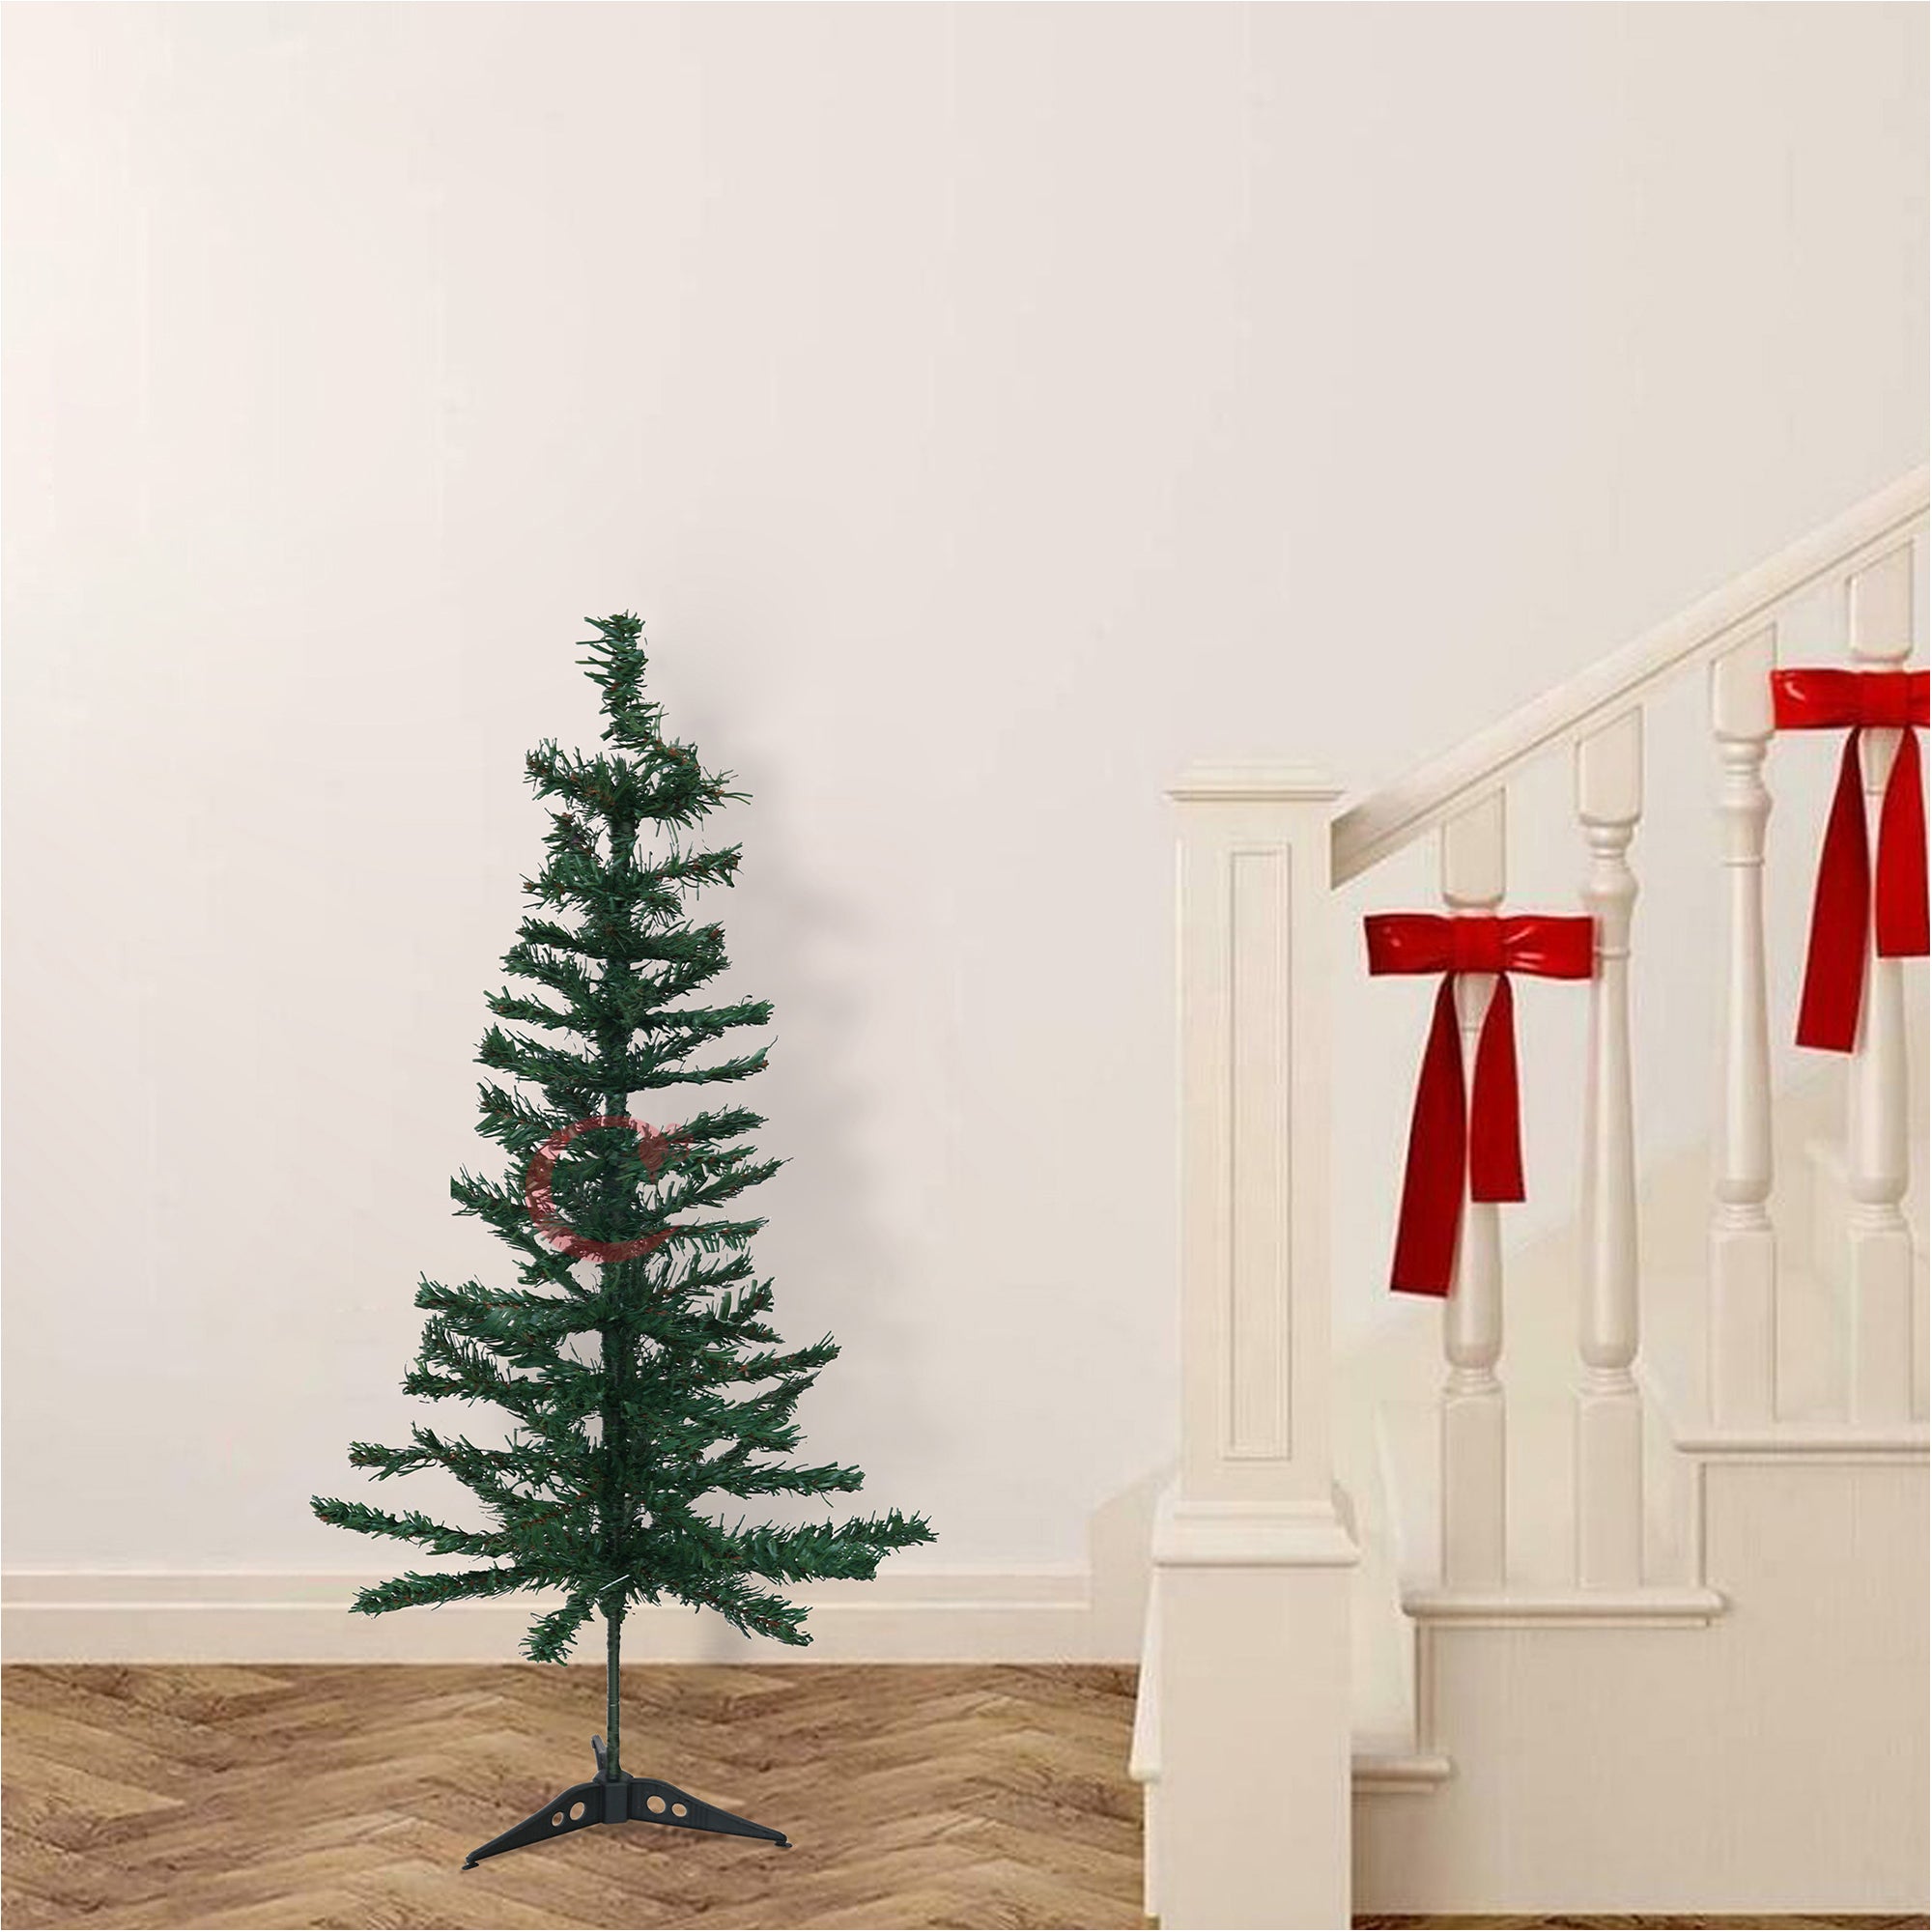 eCraftIndia 3 Feet Green Artificial Christmas Tree Xmas Pine Tree with Stand and 60 Christmas Decoration Ornaments Props - Merry Christmas Decoration Item for Home, Office, and Church 6